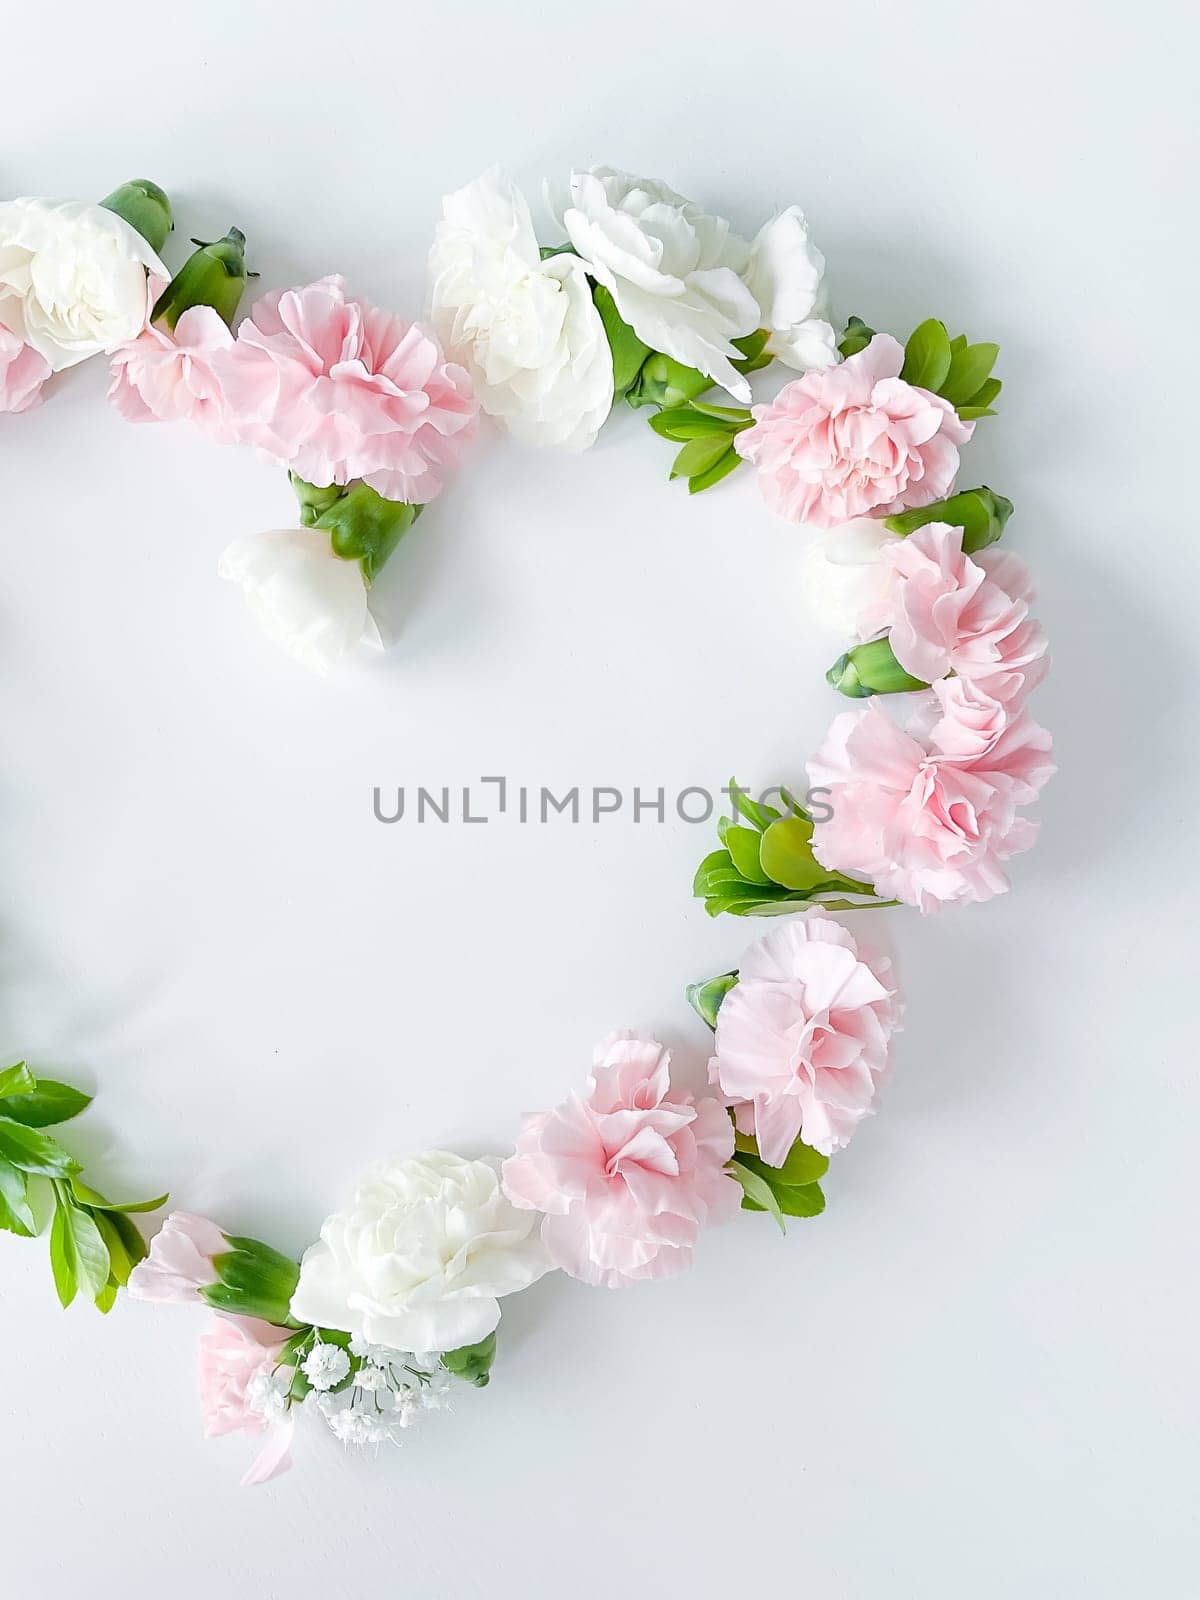 Frame in the form of a heart from pink and white carnations, green leaves, gypsophila on a white background. Flat lay, top view. Spring background. Suitable for wedding, cards and invitations